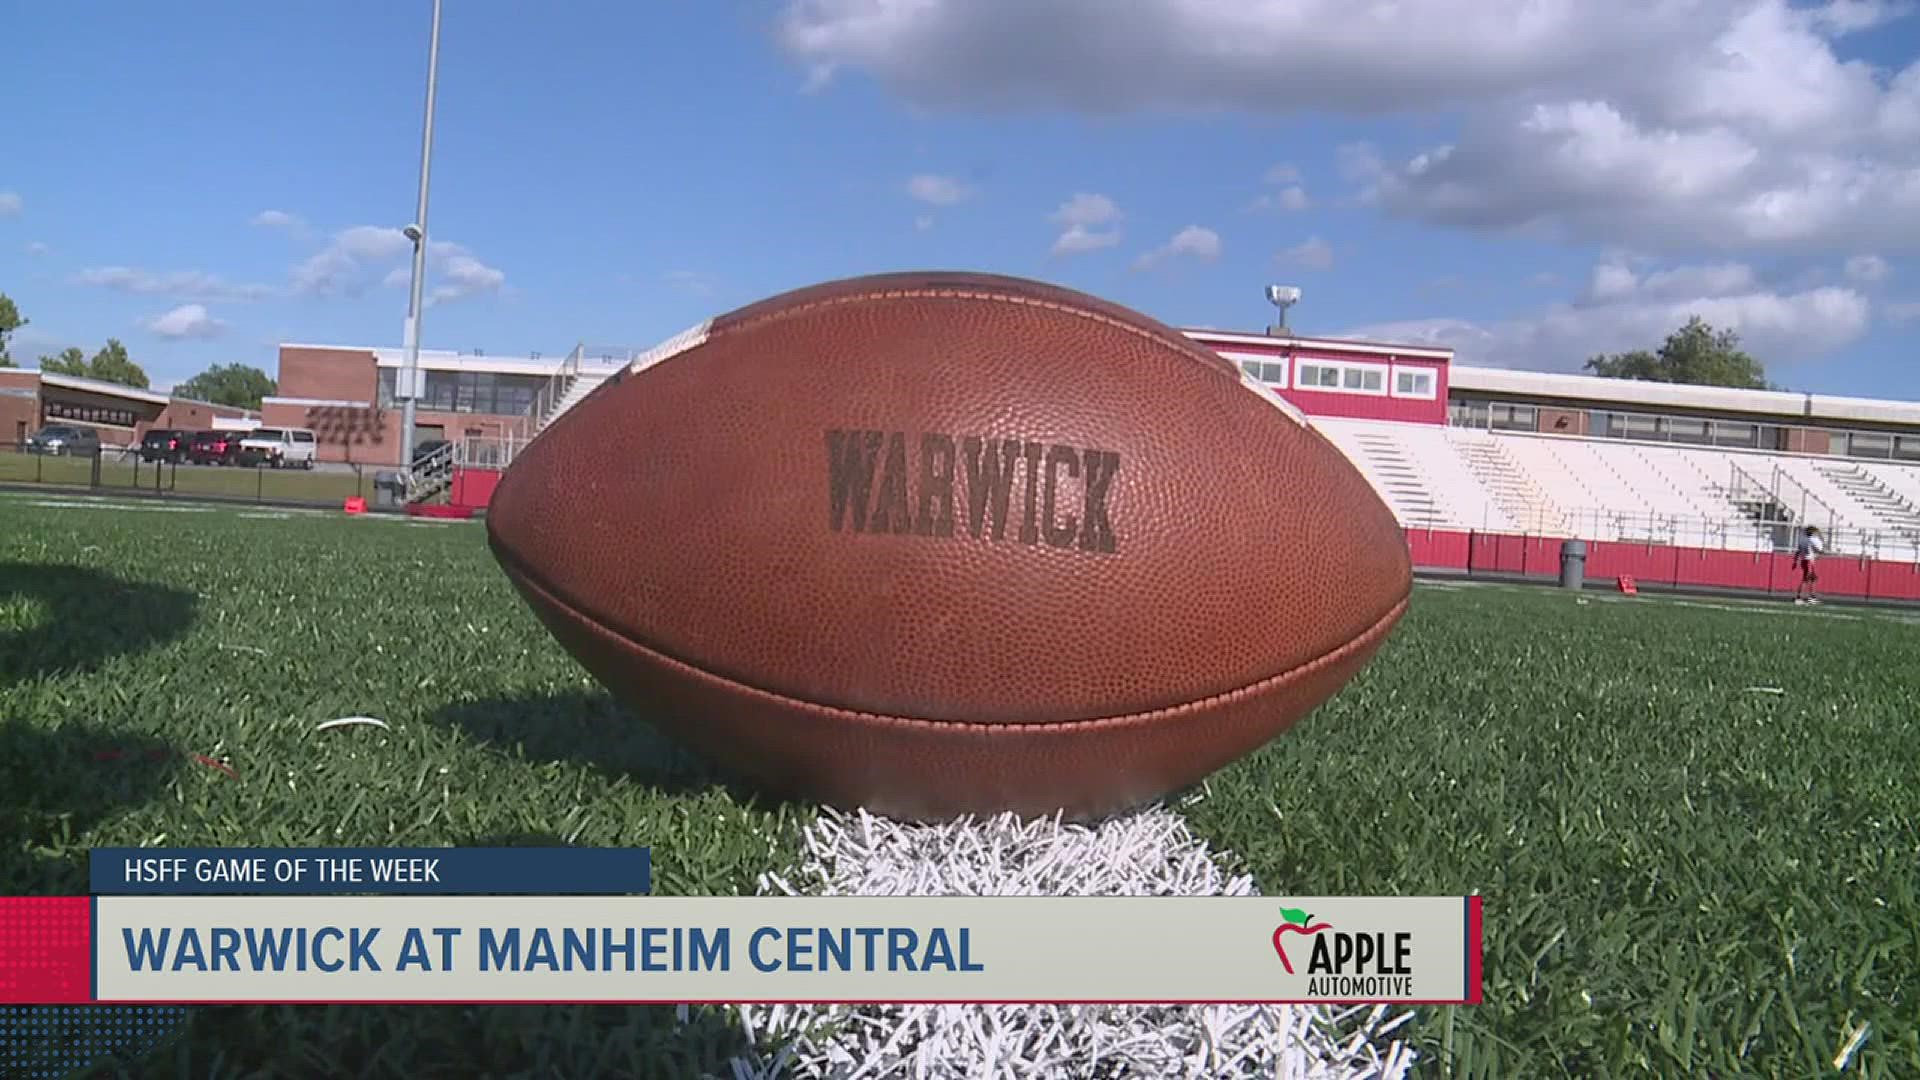 This week's Game of the Week features Warwick traveling to take on Manheim Central.